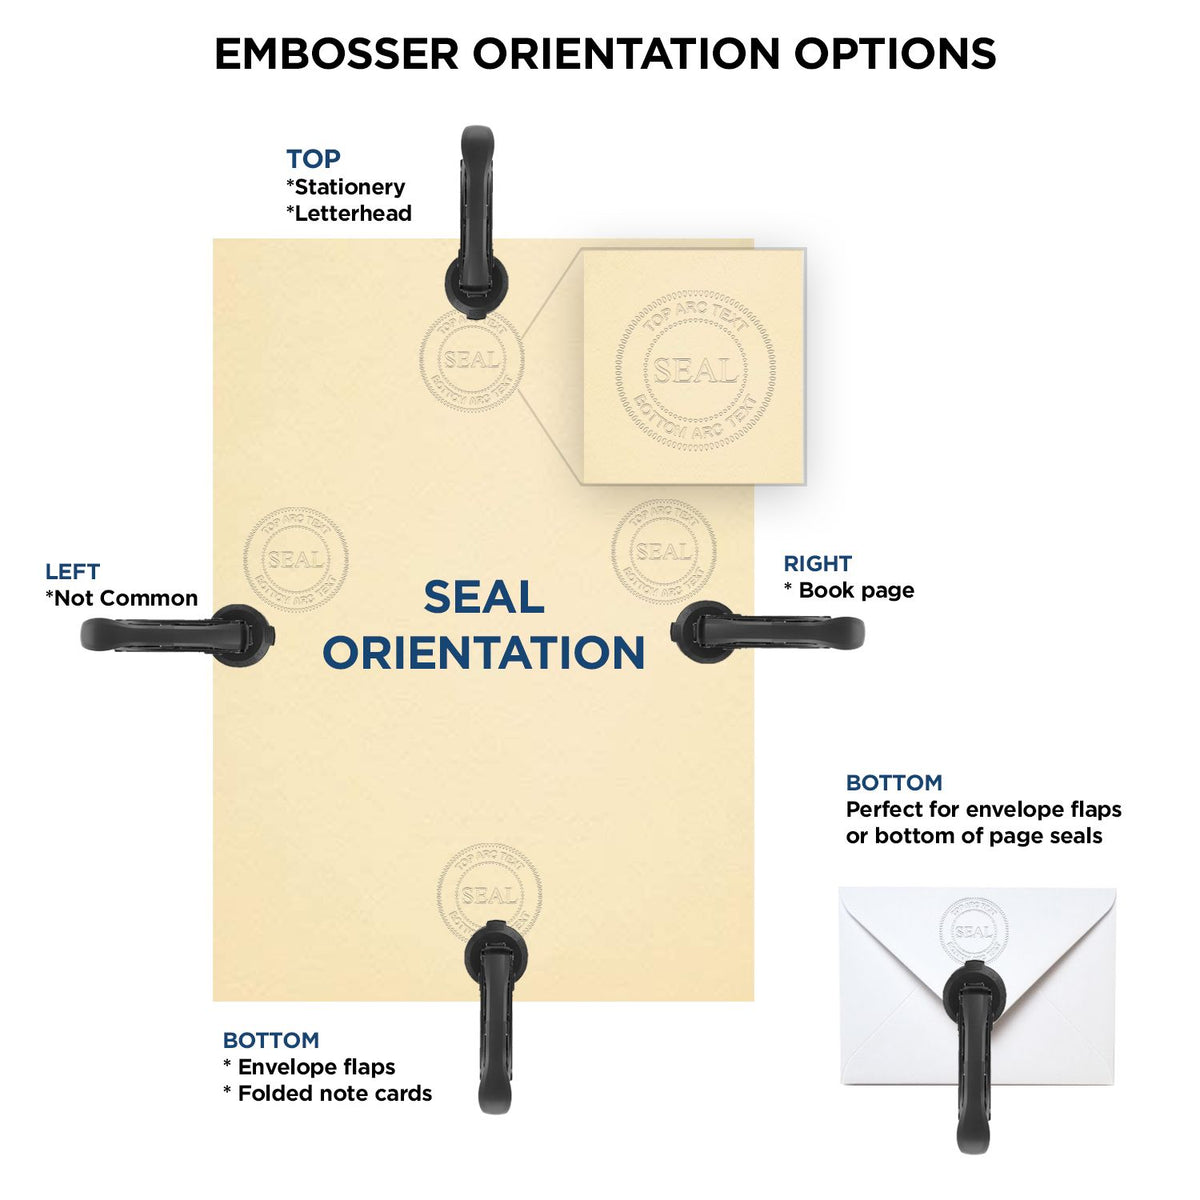 An infographic for the Handheld Nebraska Professional Geologist Embosser showing embosser orientation, this is showing examples of a top, bottom, right and left insert.